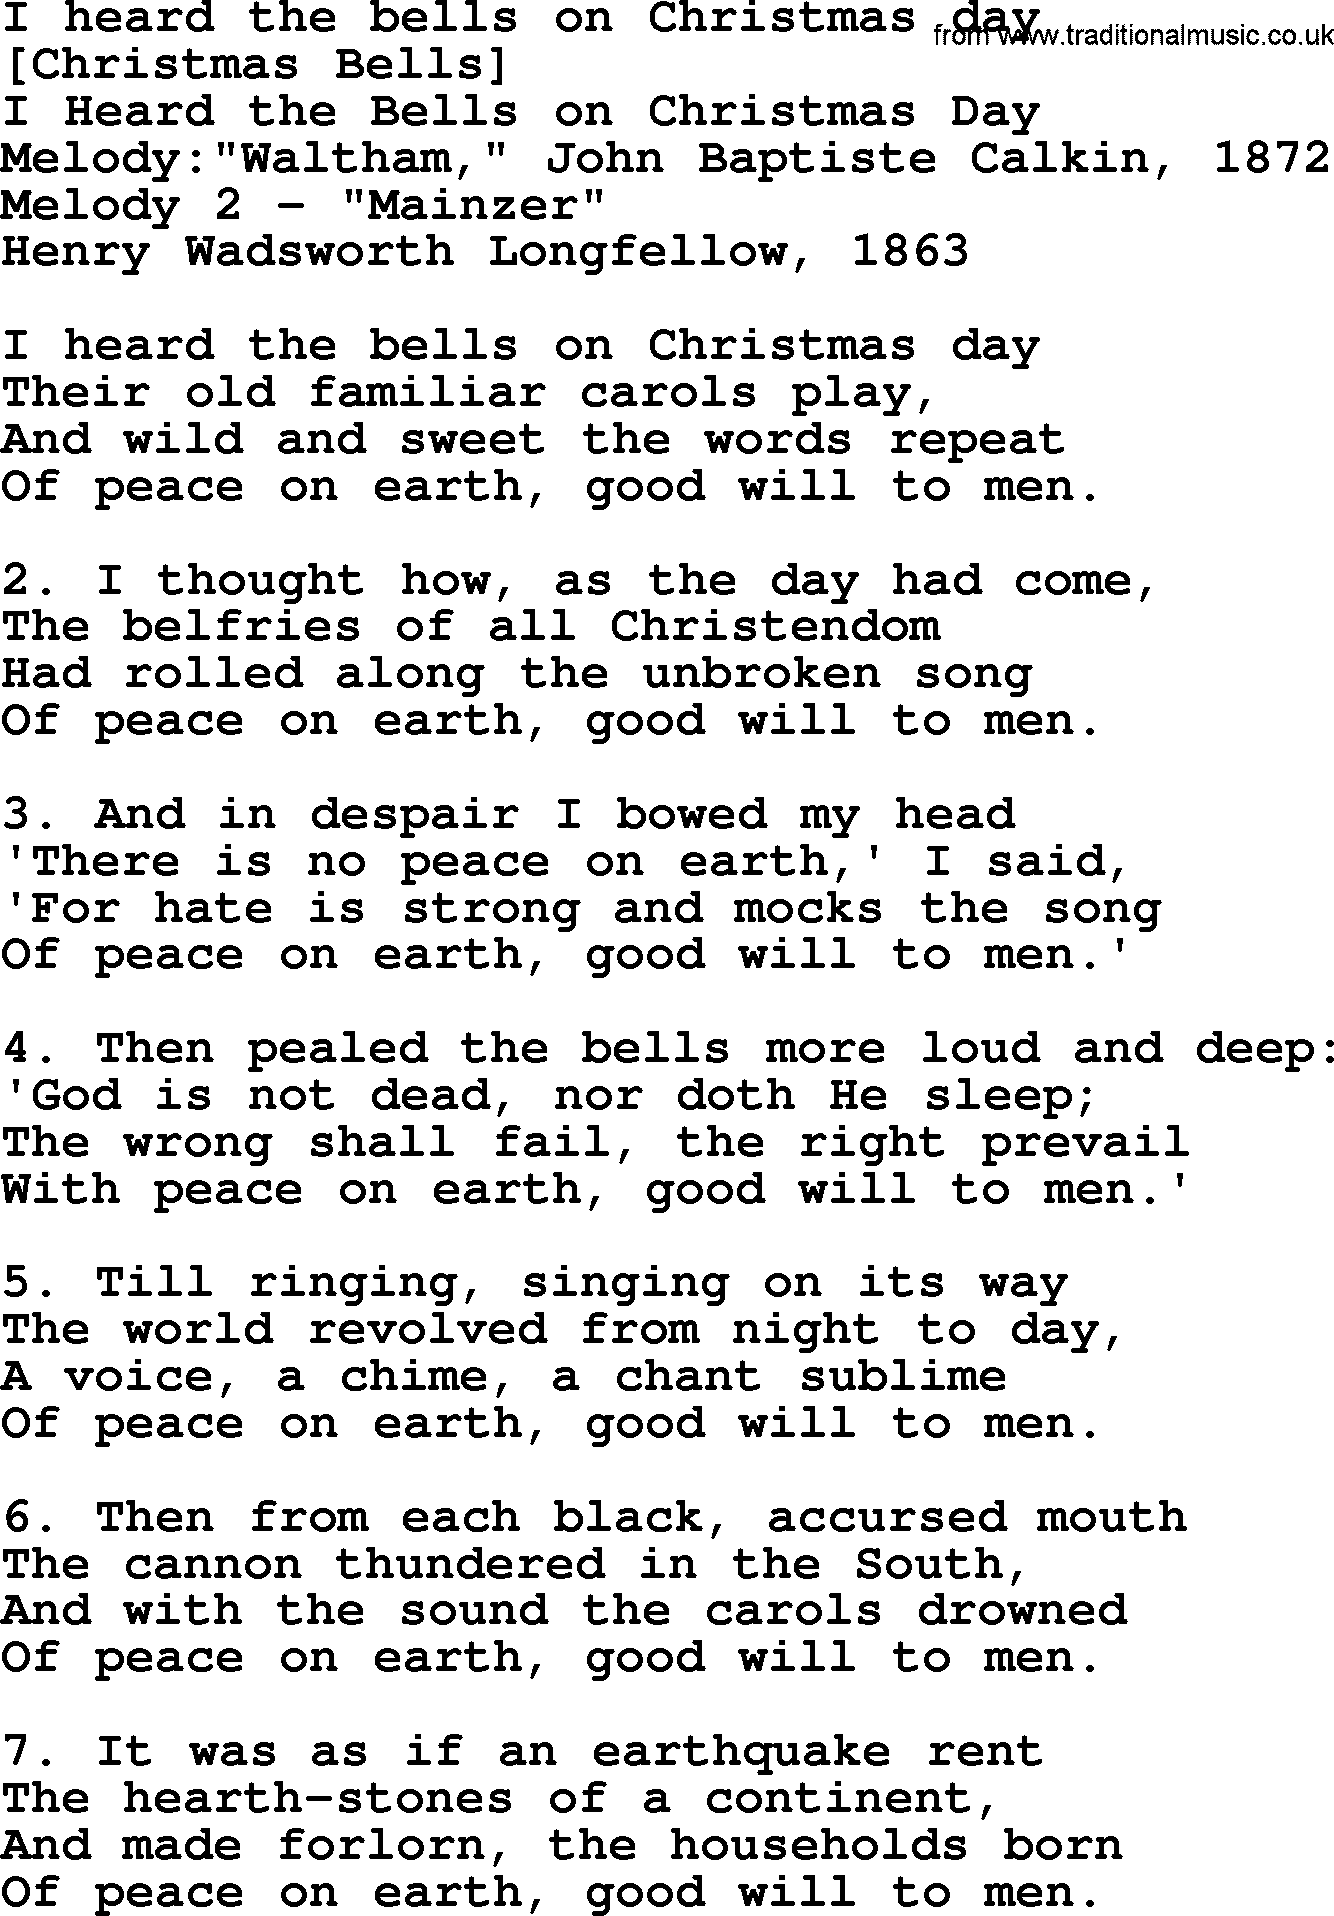 Old American Song: I Heard The Bells On Christmas Day, lyrics